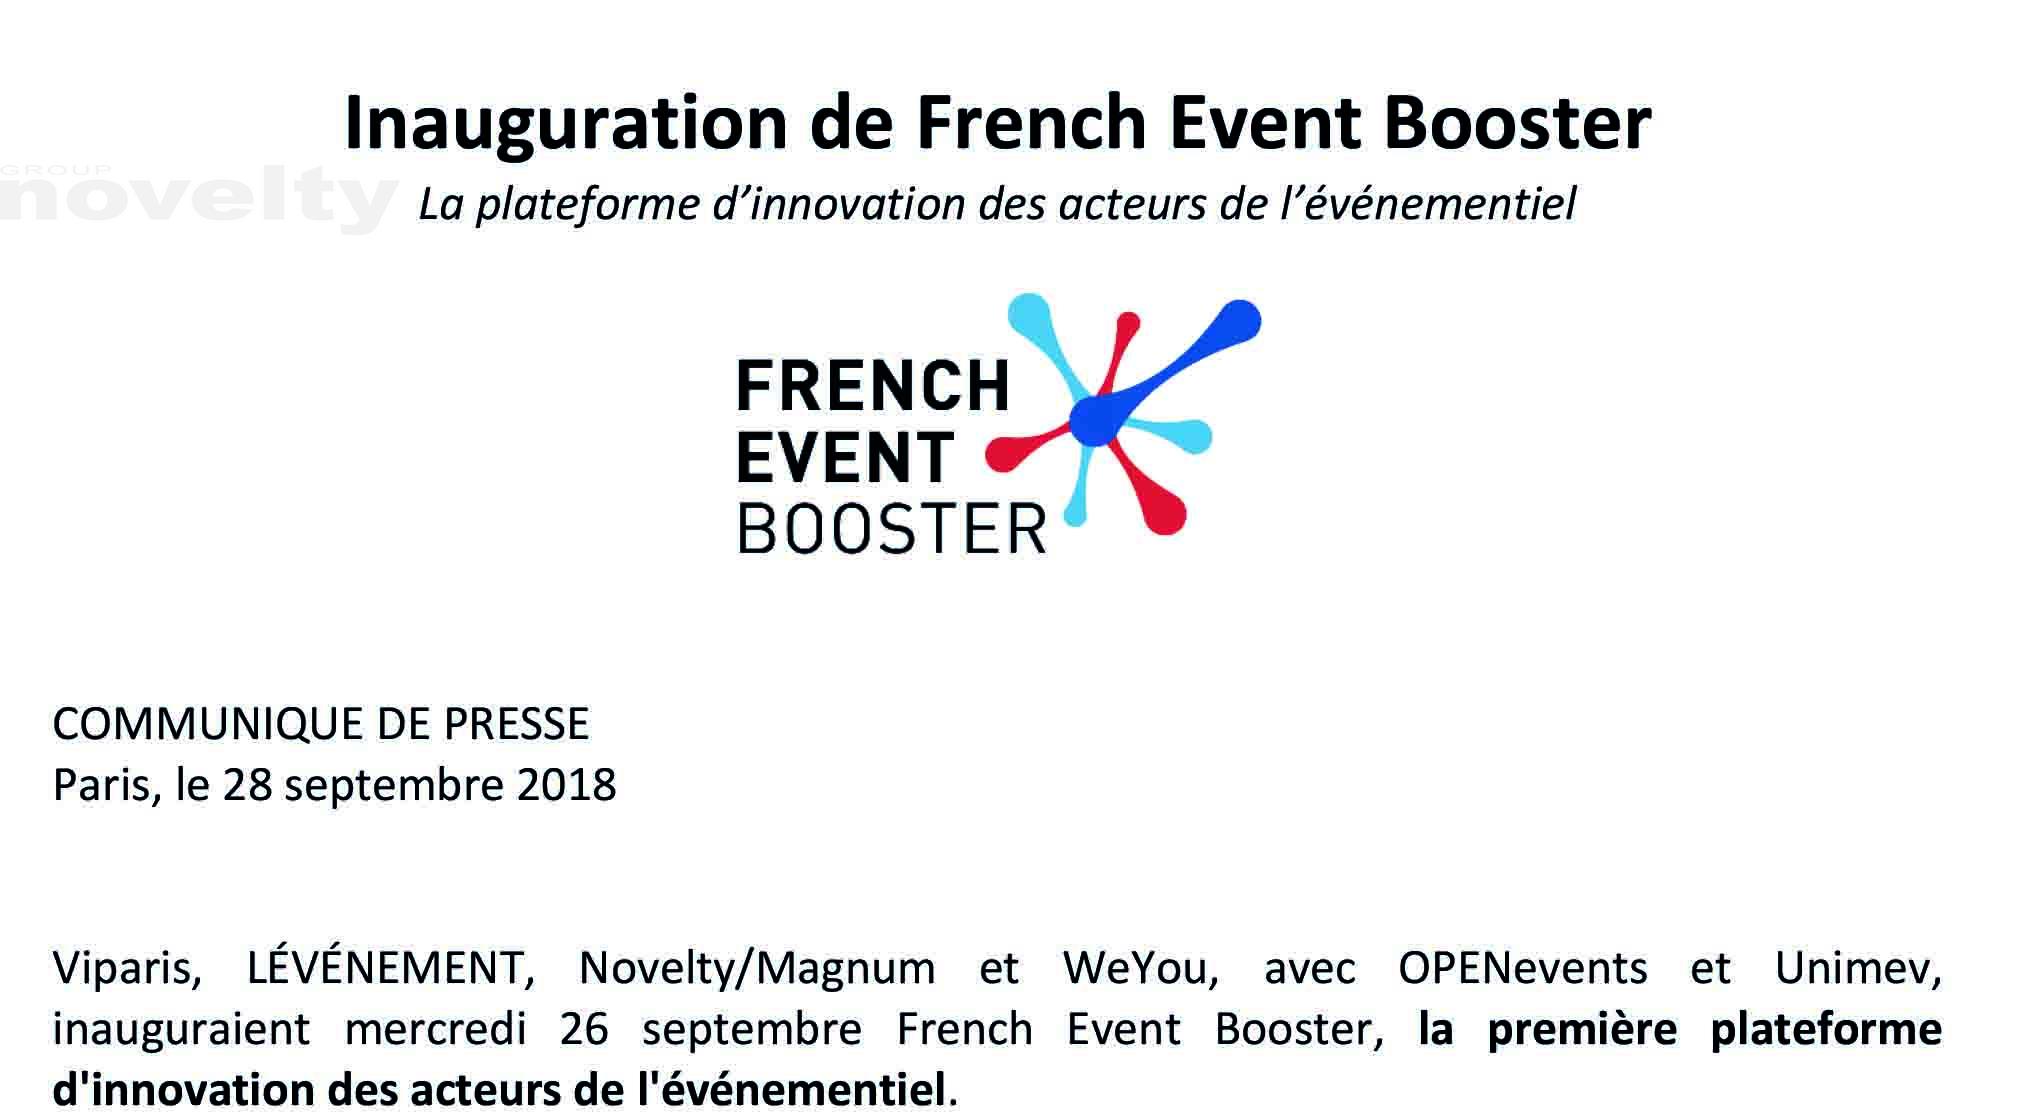 Visuel Inauguration de French Event Booster 